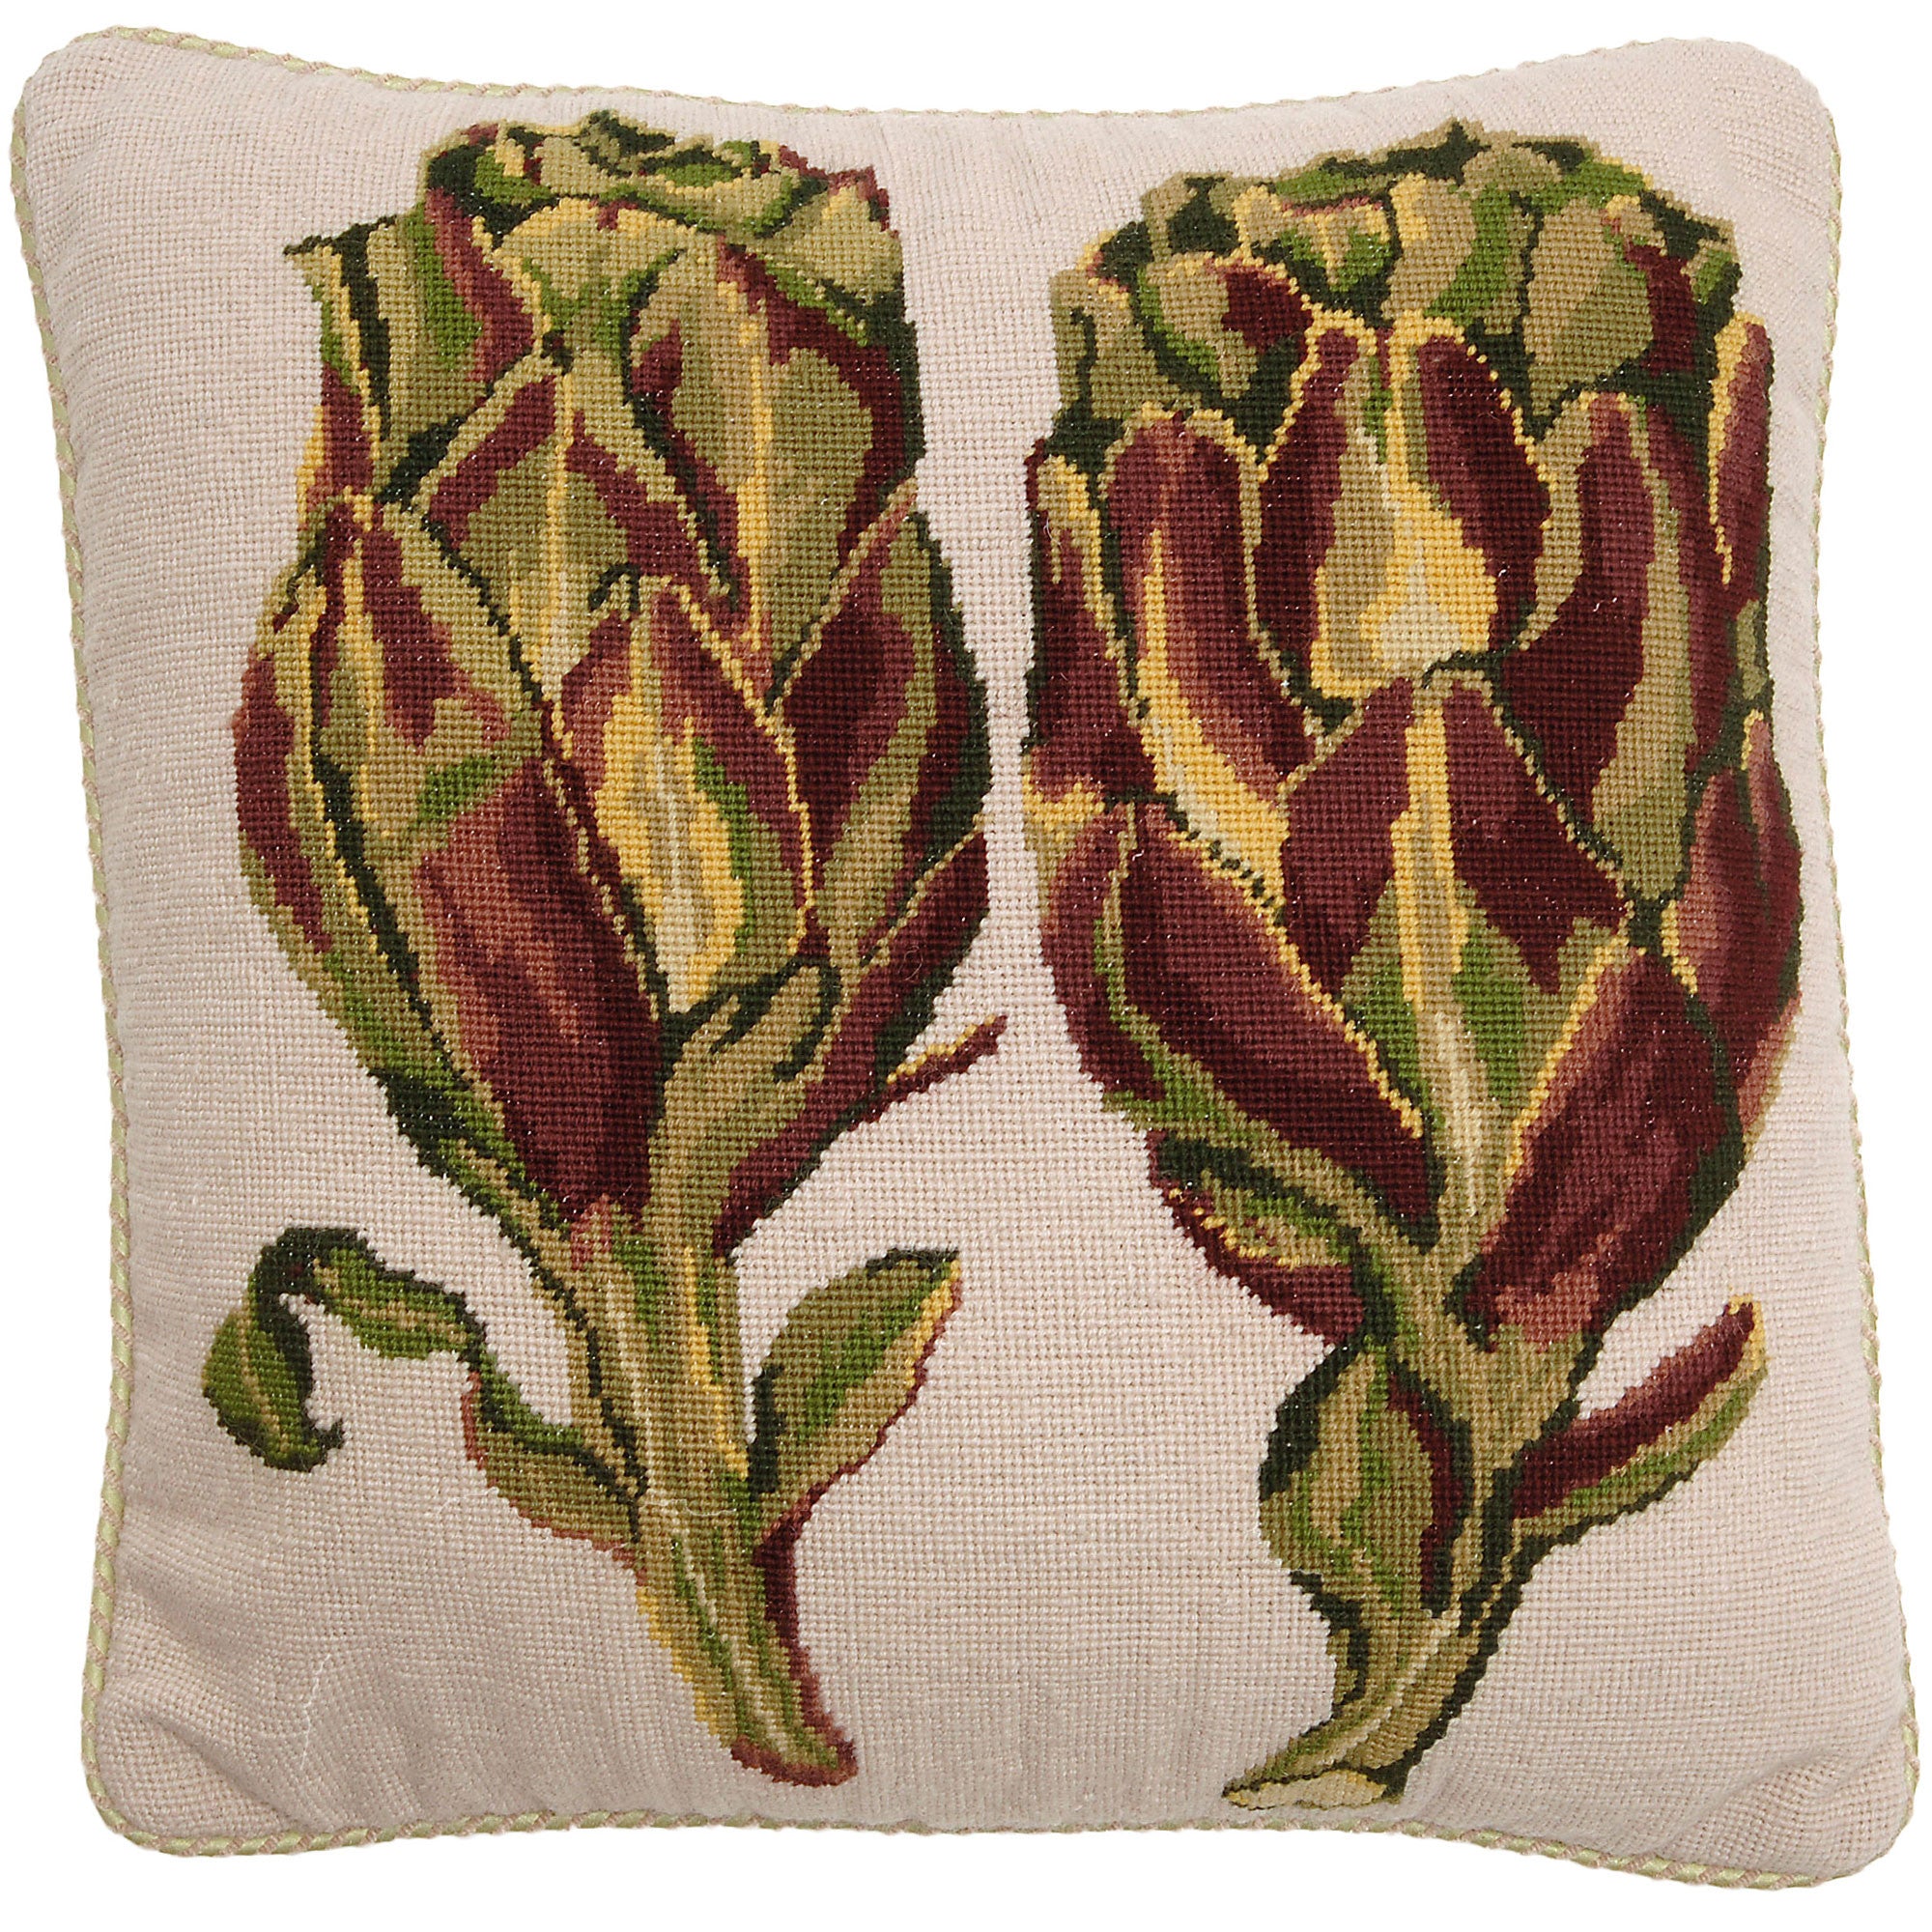 Square needlepoint cushion featuring two artichokes in green and brown on a cream background and cream piping.